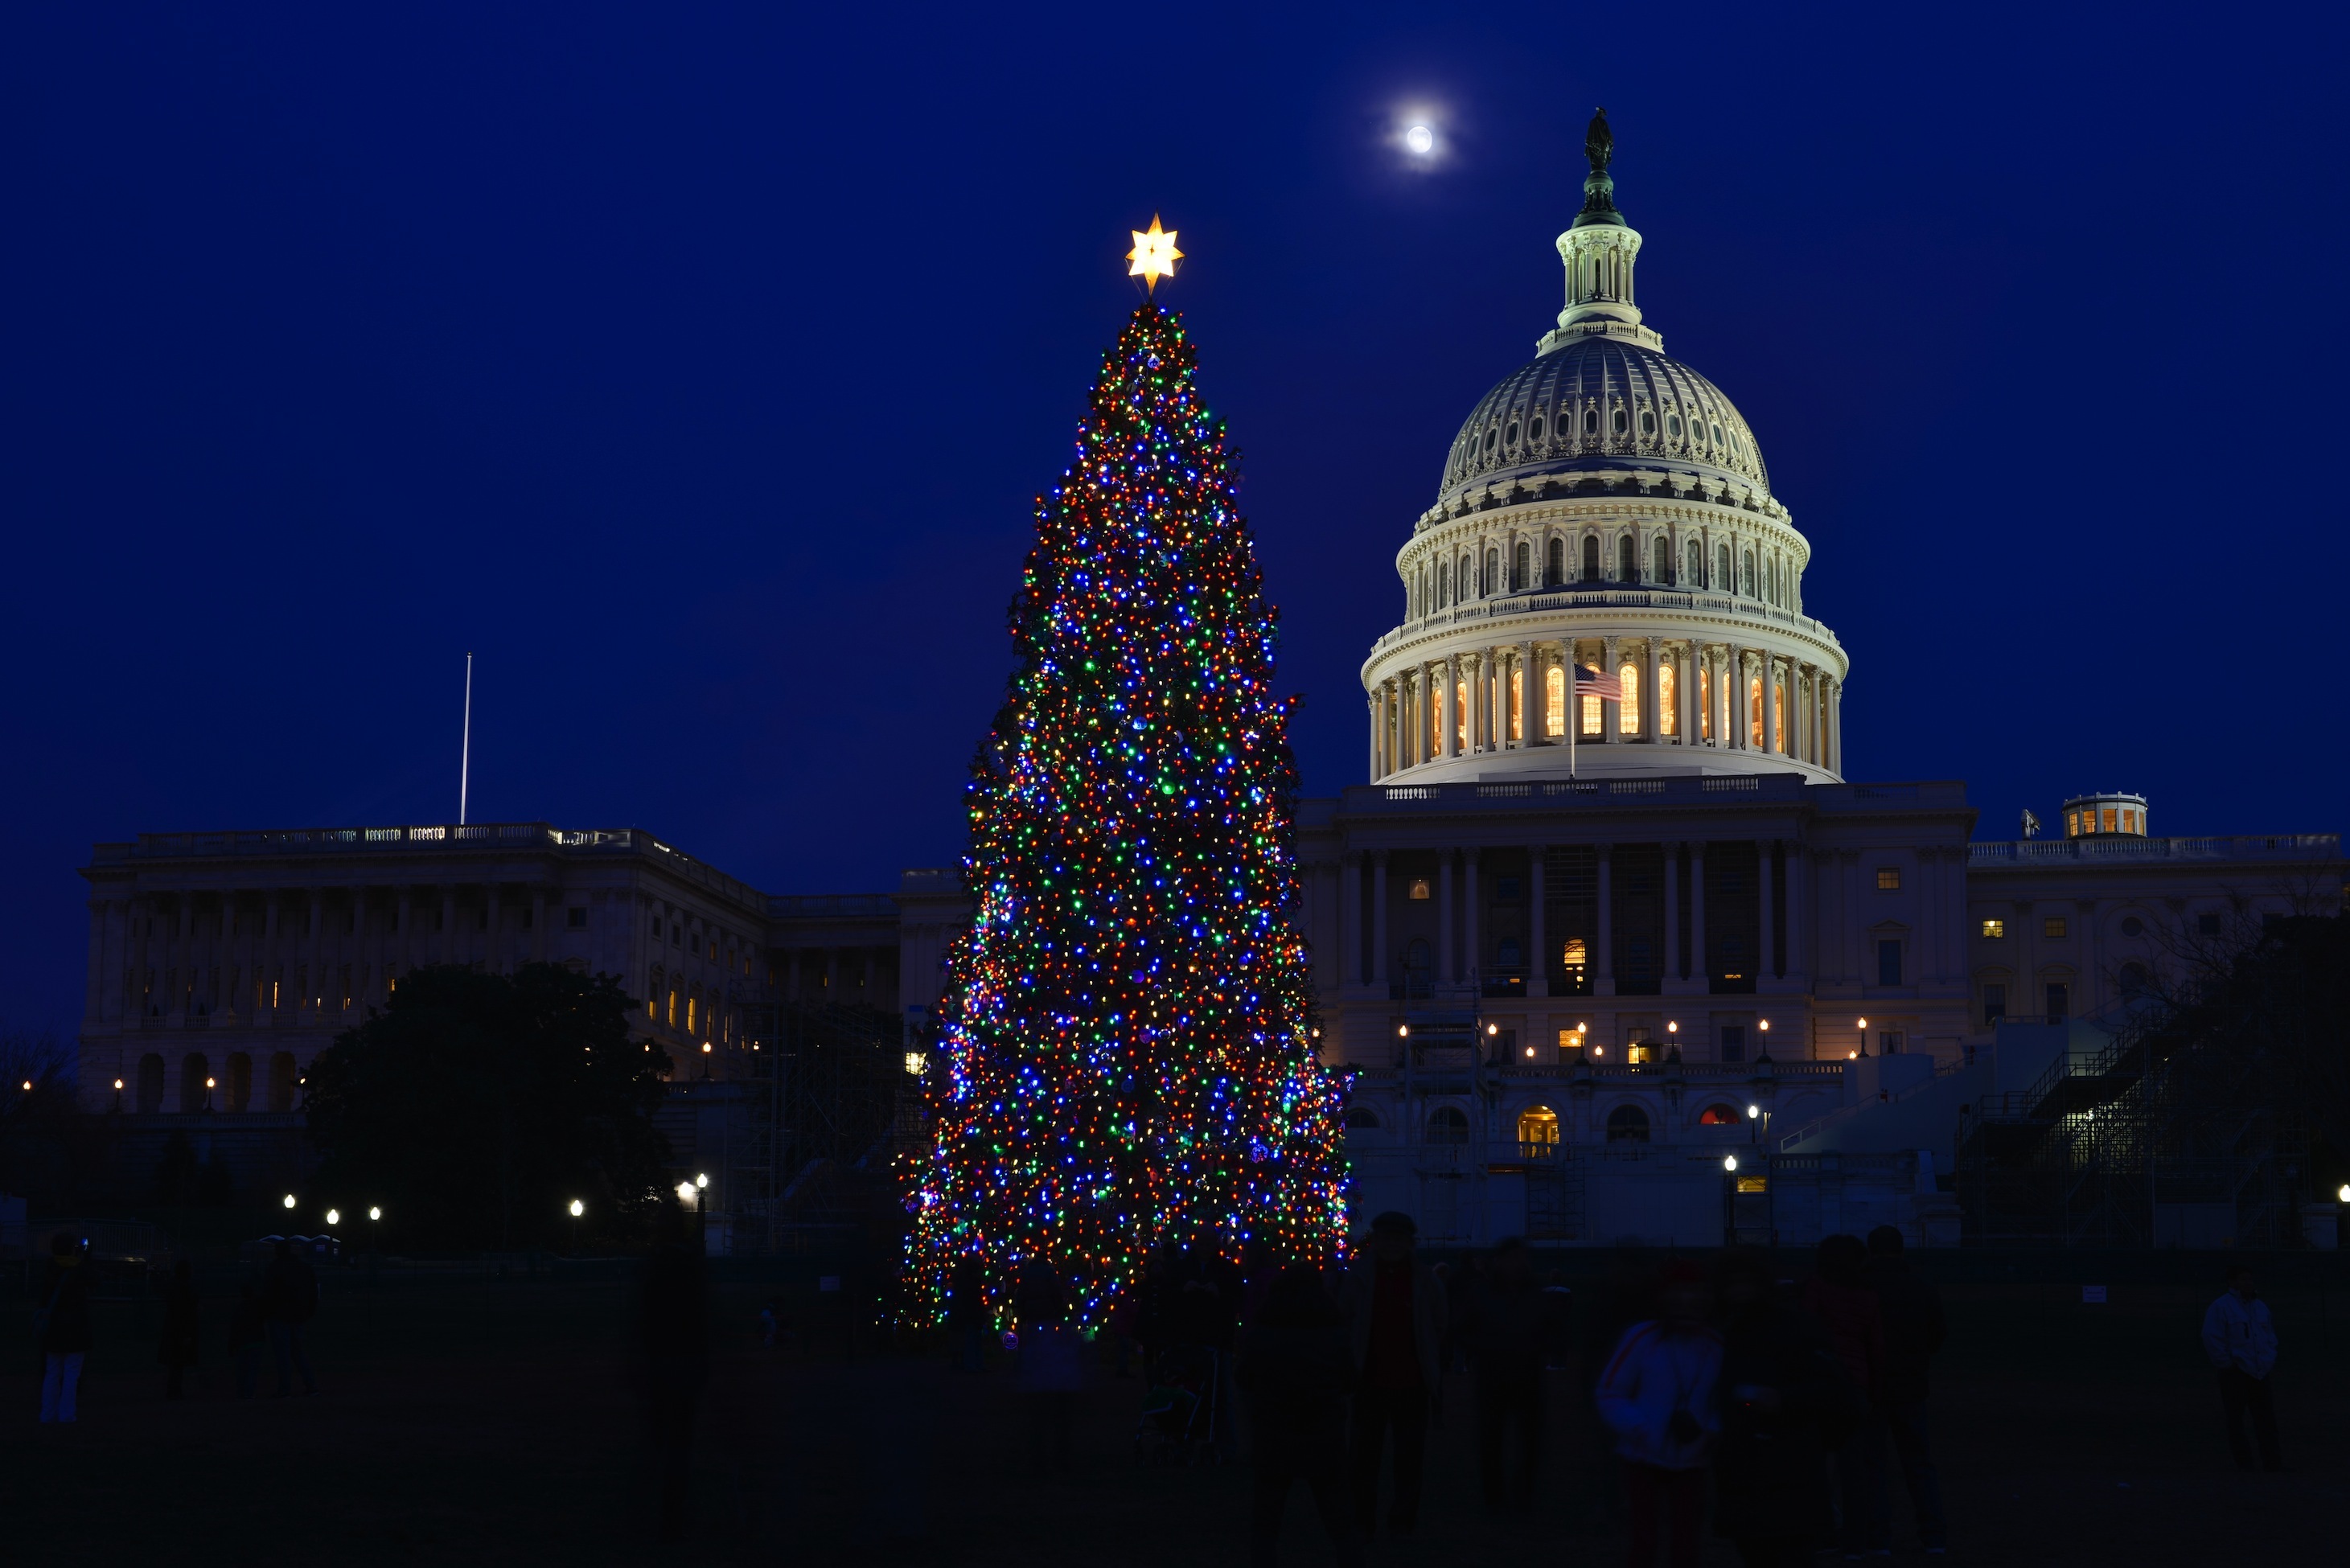 2014 Christmas events and Christmas shows in Washington DC,